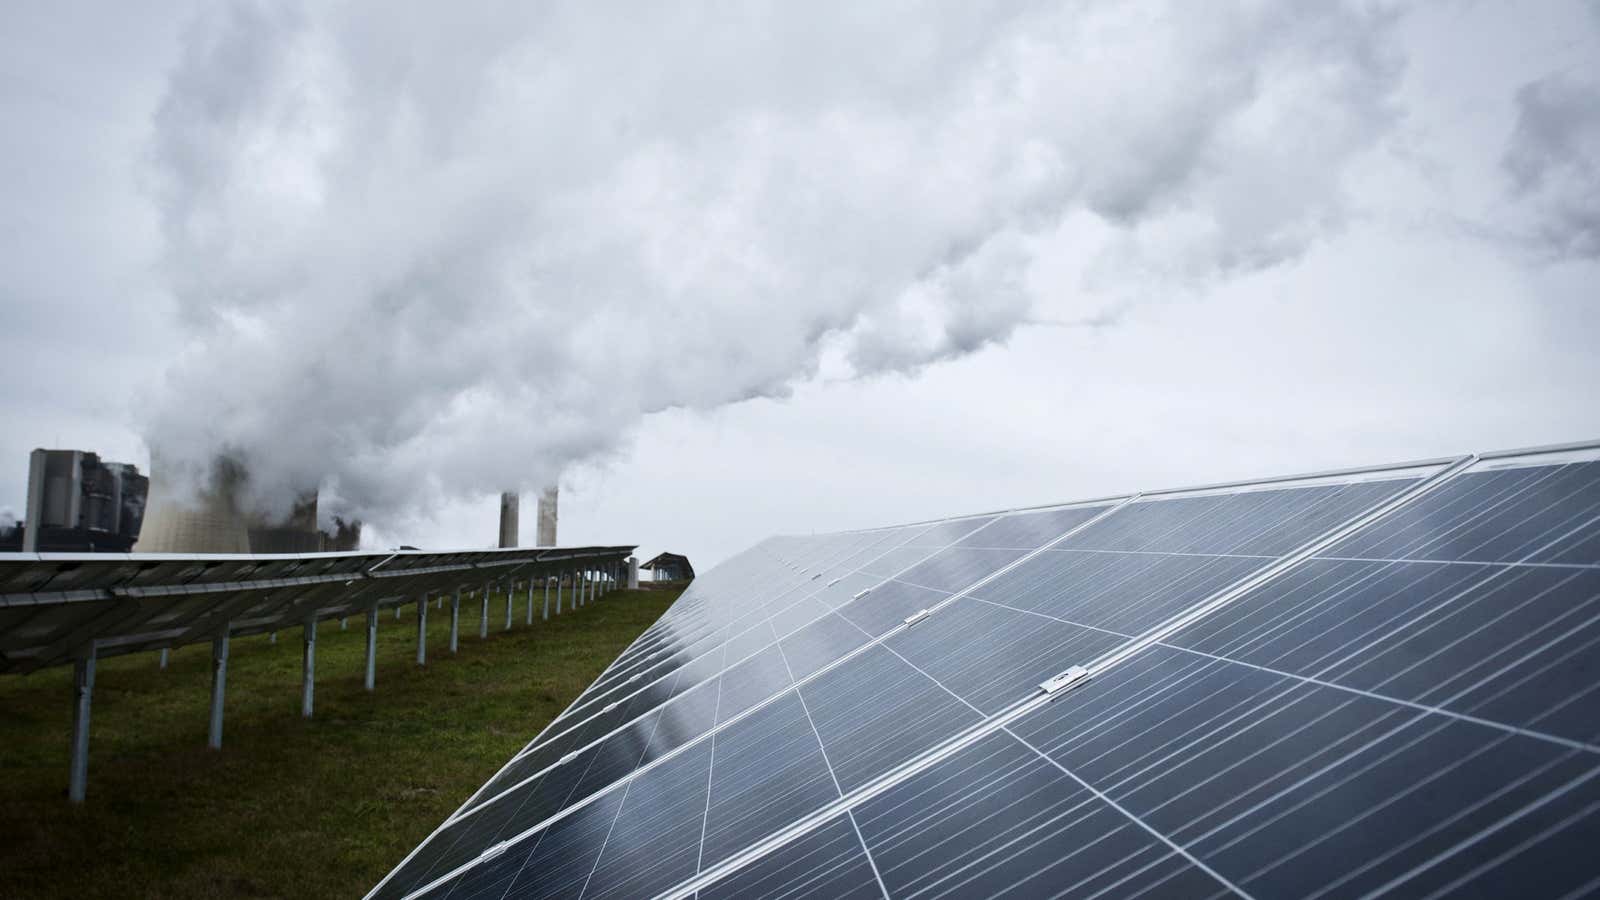 Germany’s subsidies to the solar sector didn’t necessarily help its photovoltaic industry.